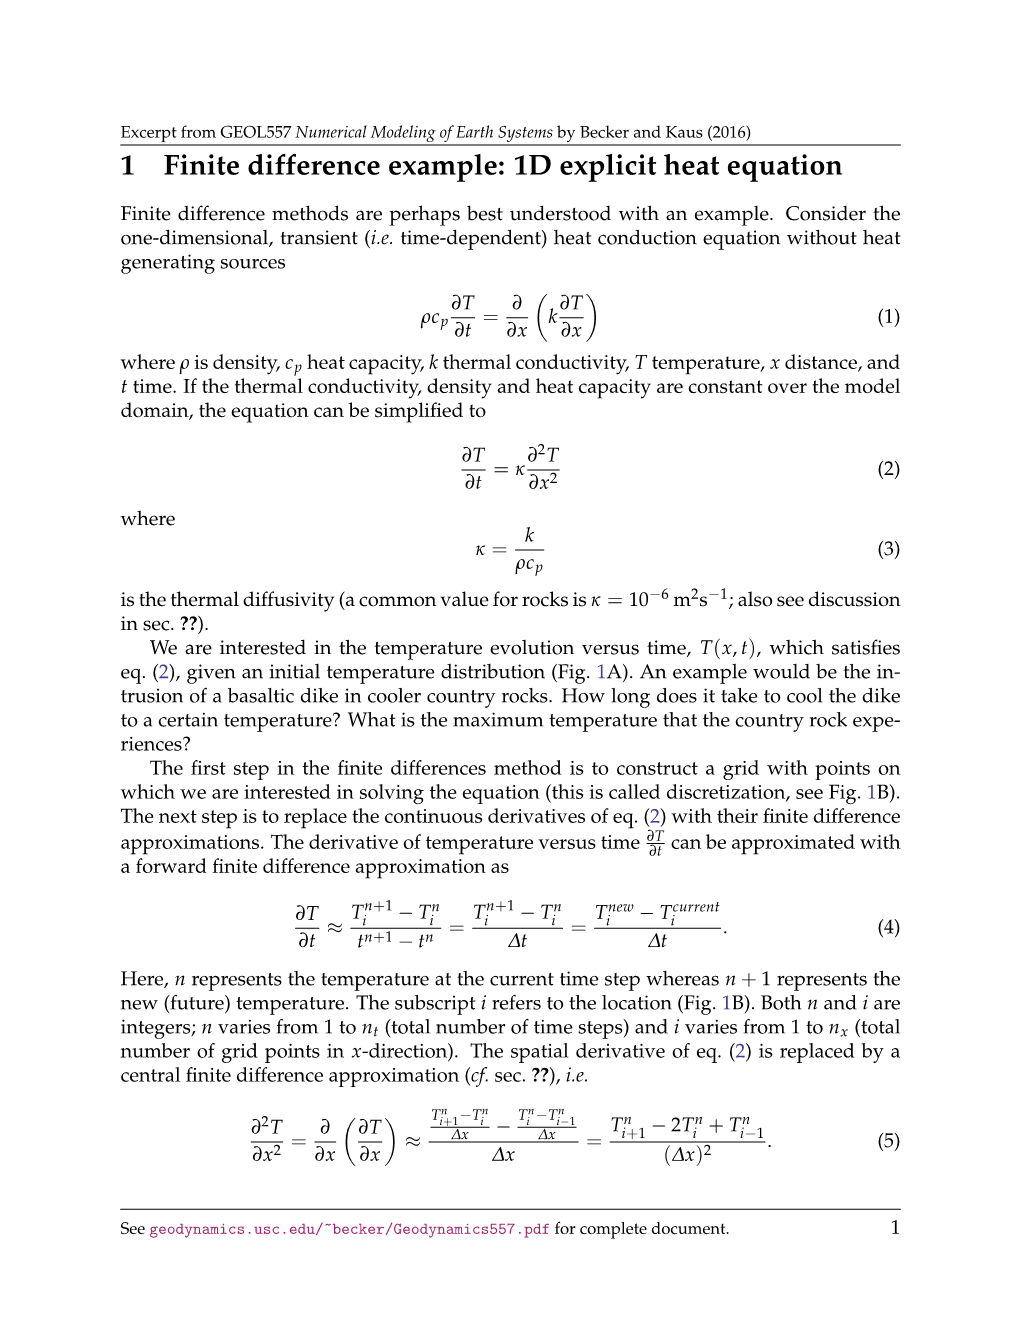 1 Finite Difference Example: 1D Explicit Heat Equation